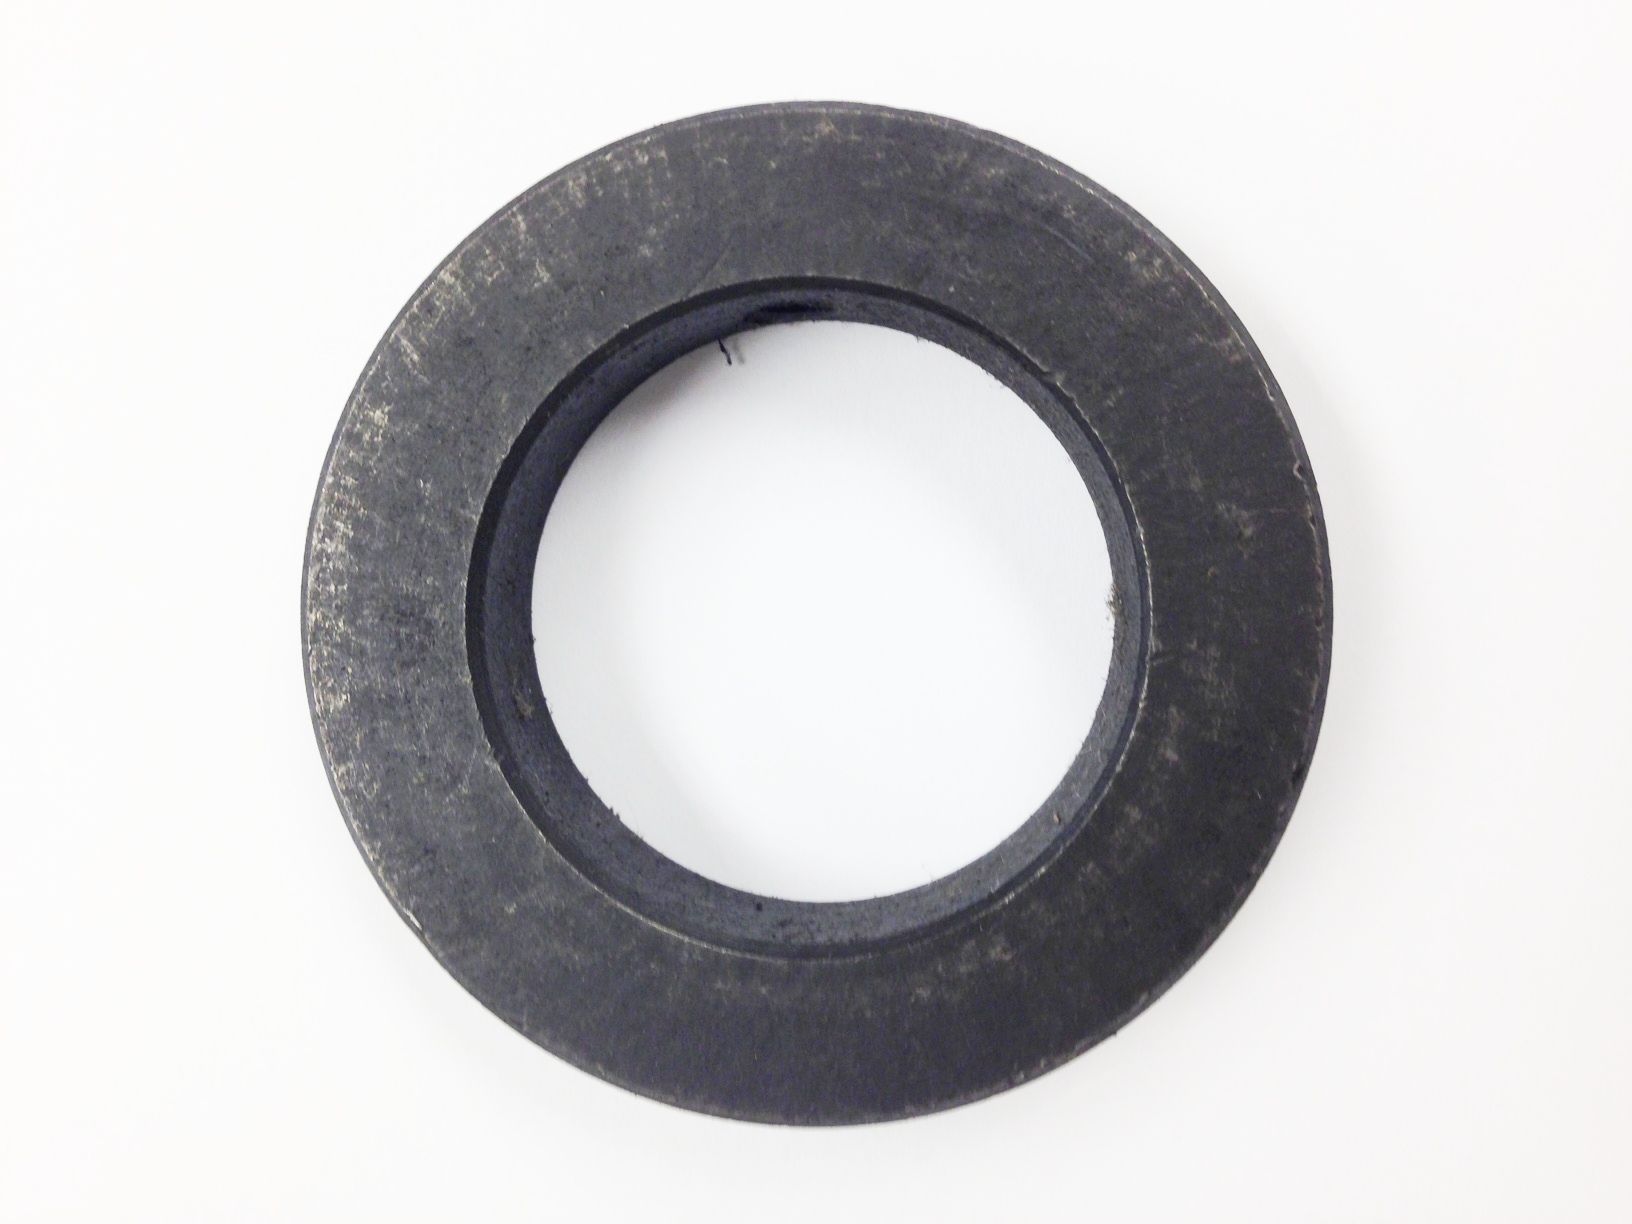 56MM ID RING FOR 3 TON RATCHET TYPE ARBOR PRESS (8600-3403)